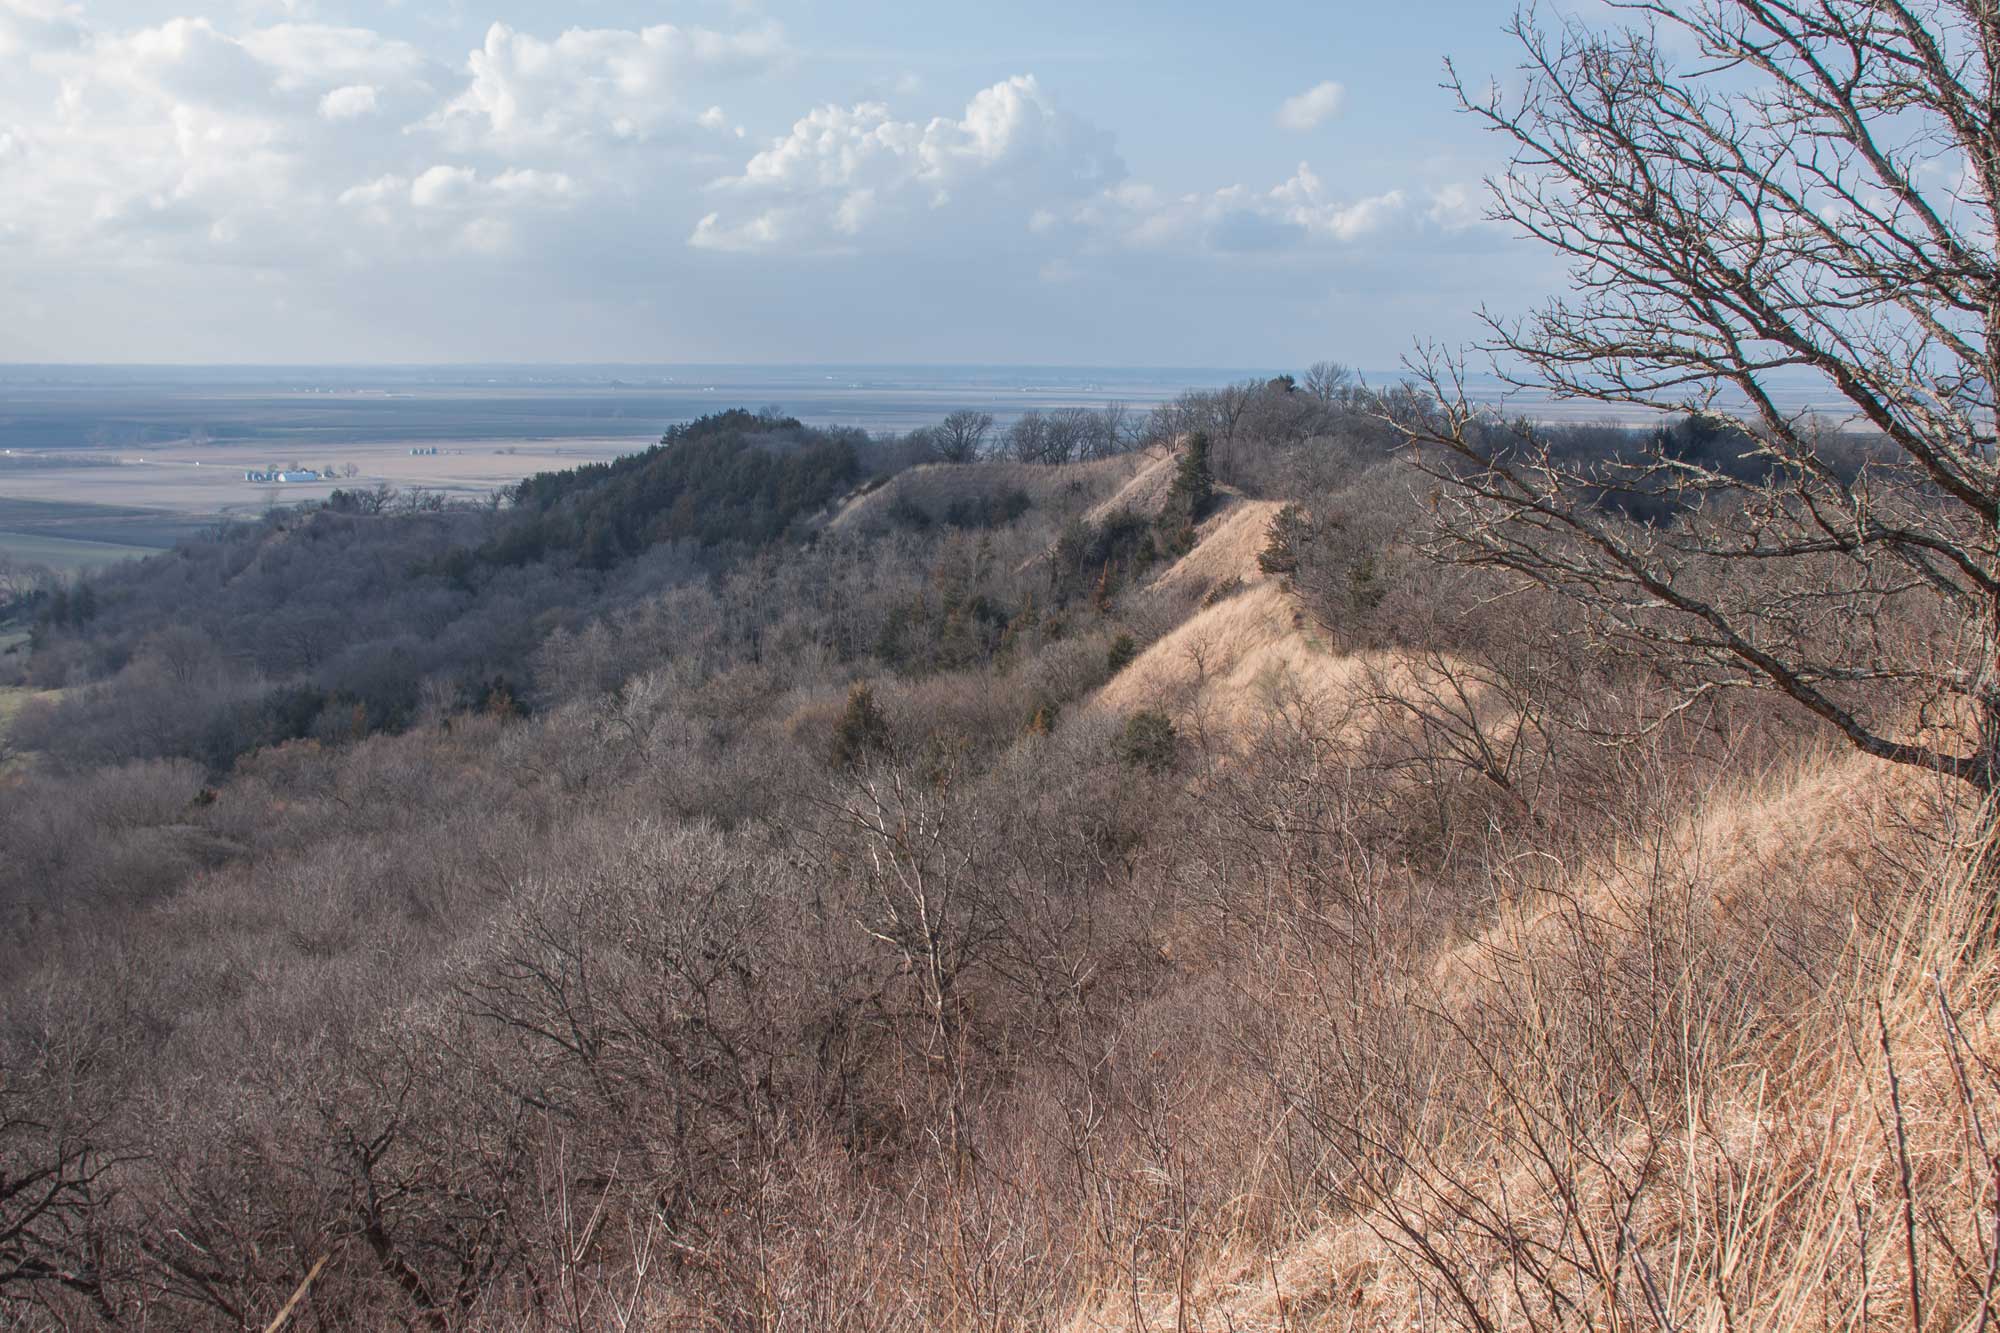 Photograph of loess Hills in Iowa. The photo shows a ridge covered with trees missing their leaves and patches of dry grass. The sky is gray with clouds, and a flat plain can be seen in the distance.